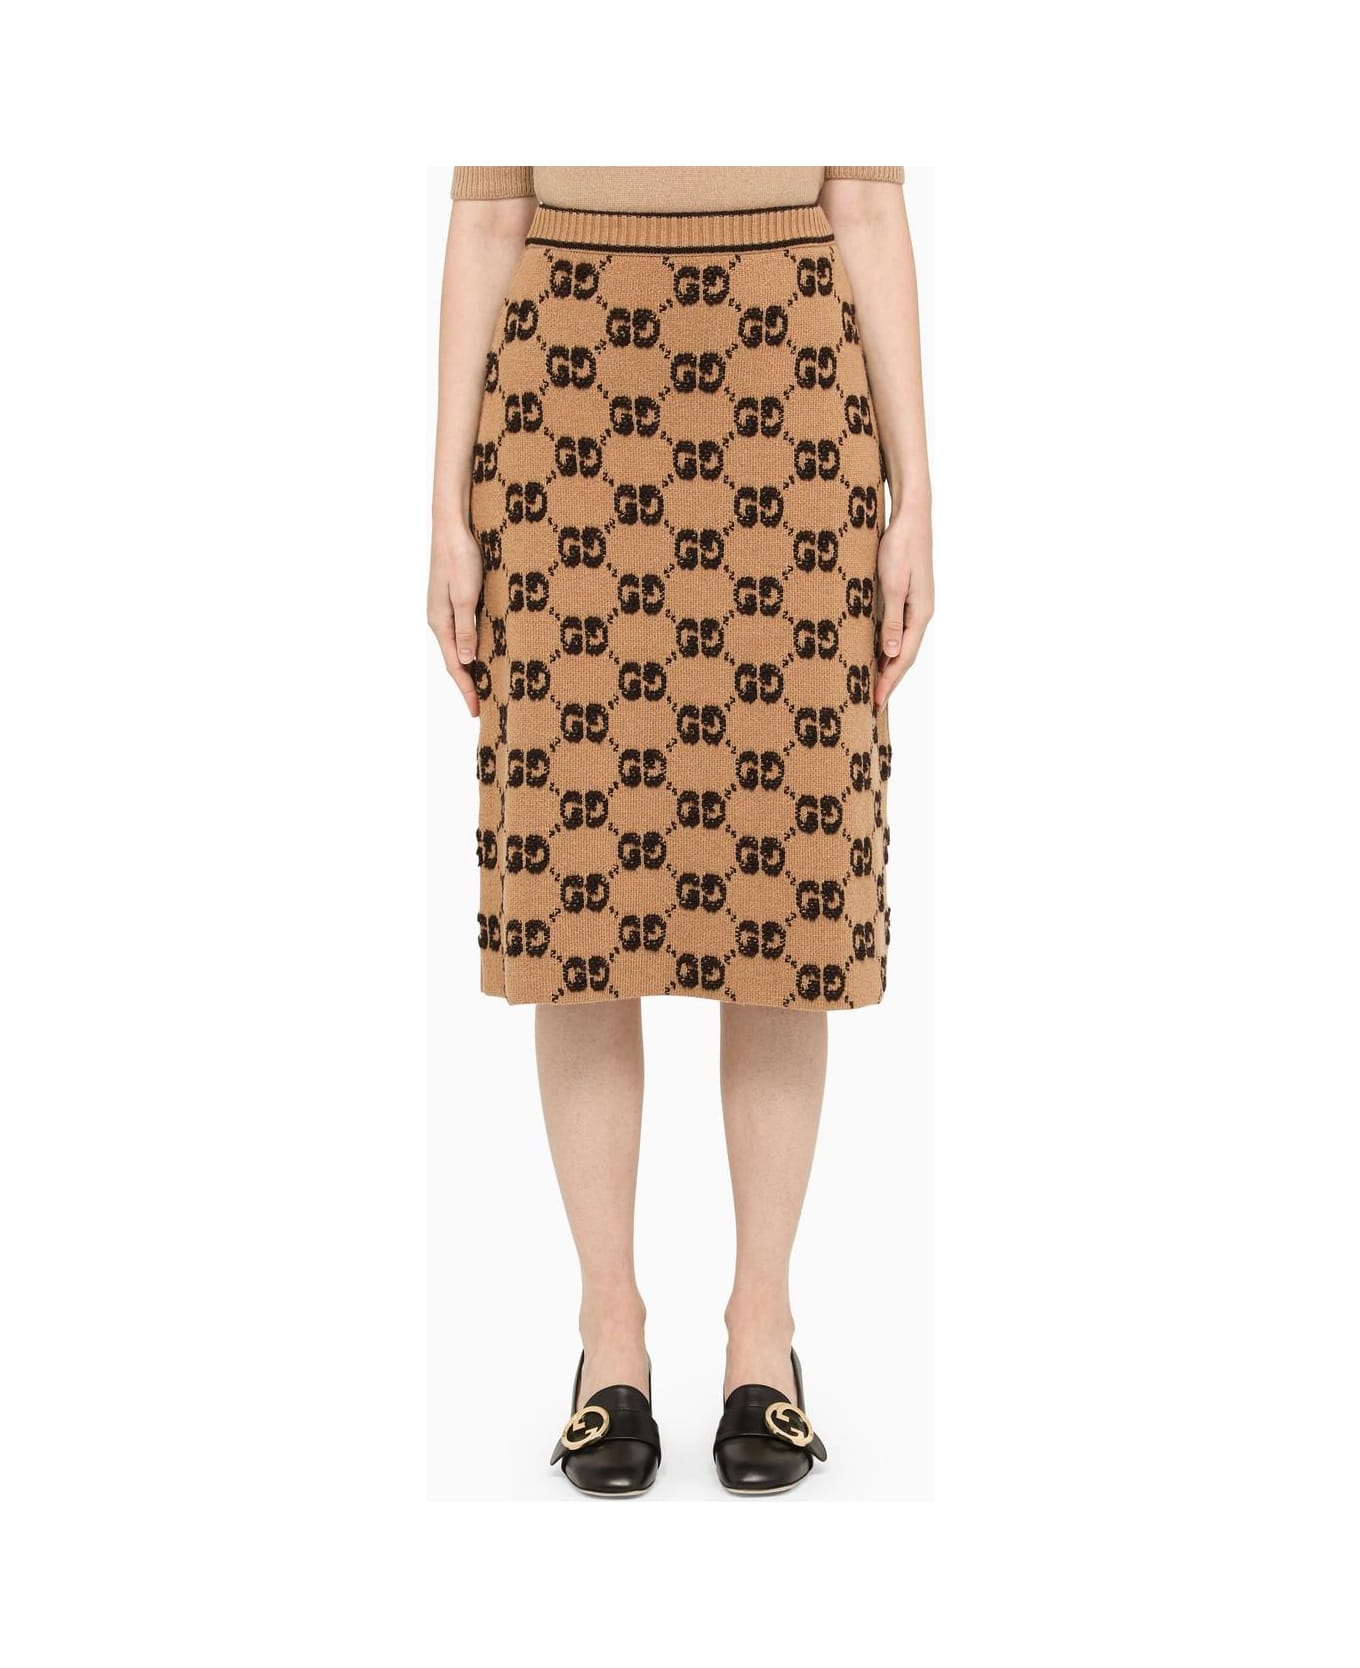 Gucci Camel Skirt In Wool Knit - Camel